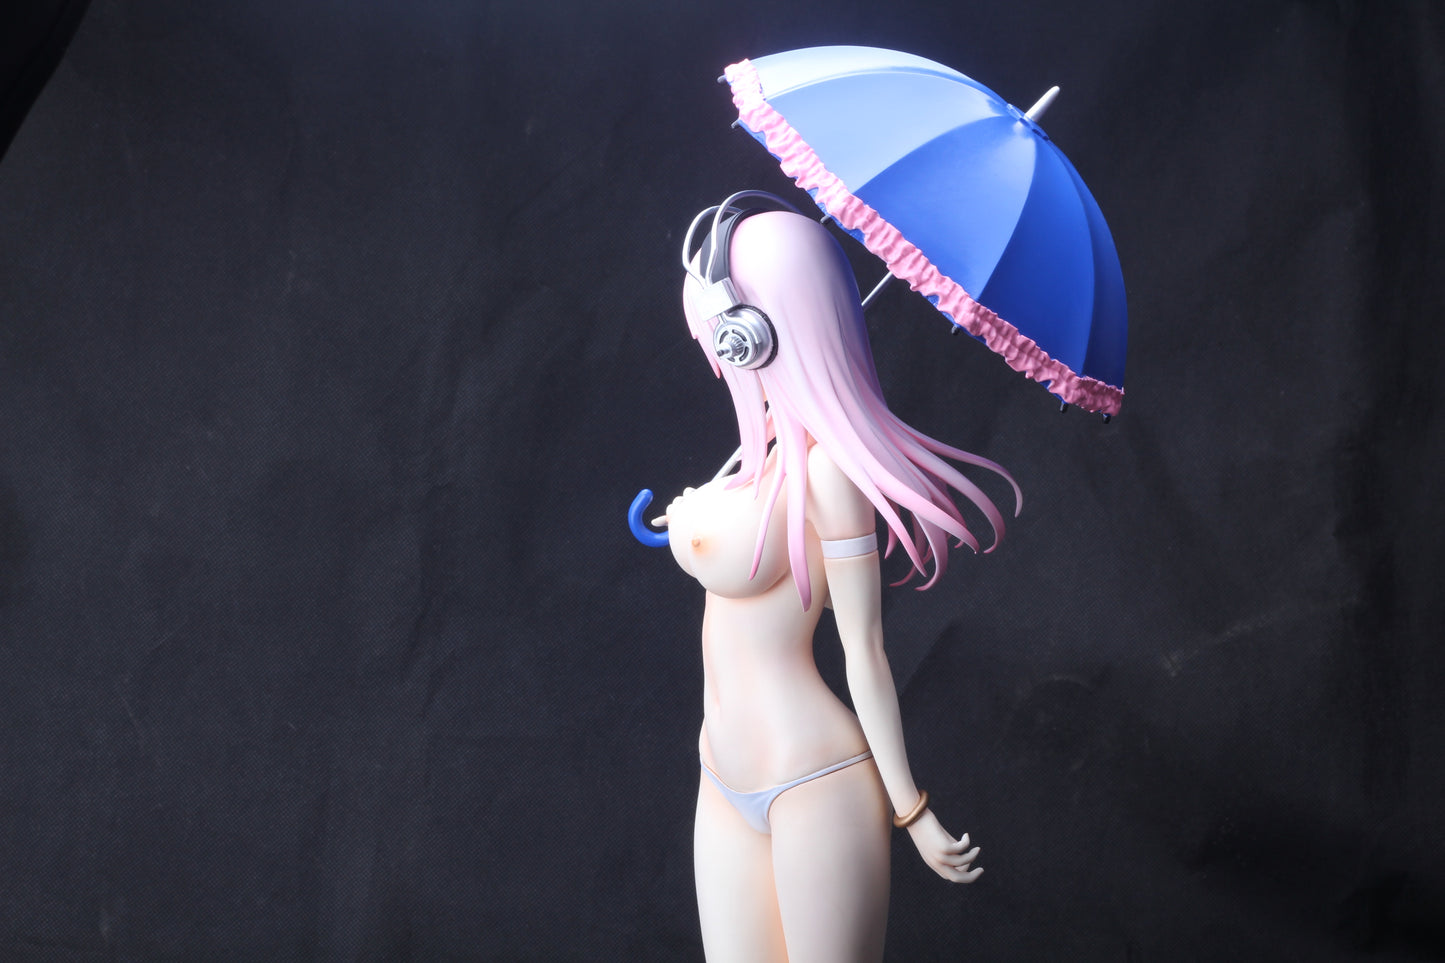 Japanese anime super sonico 1/4 naked anime figure sexy collectible action figures